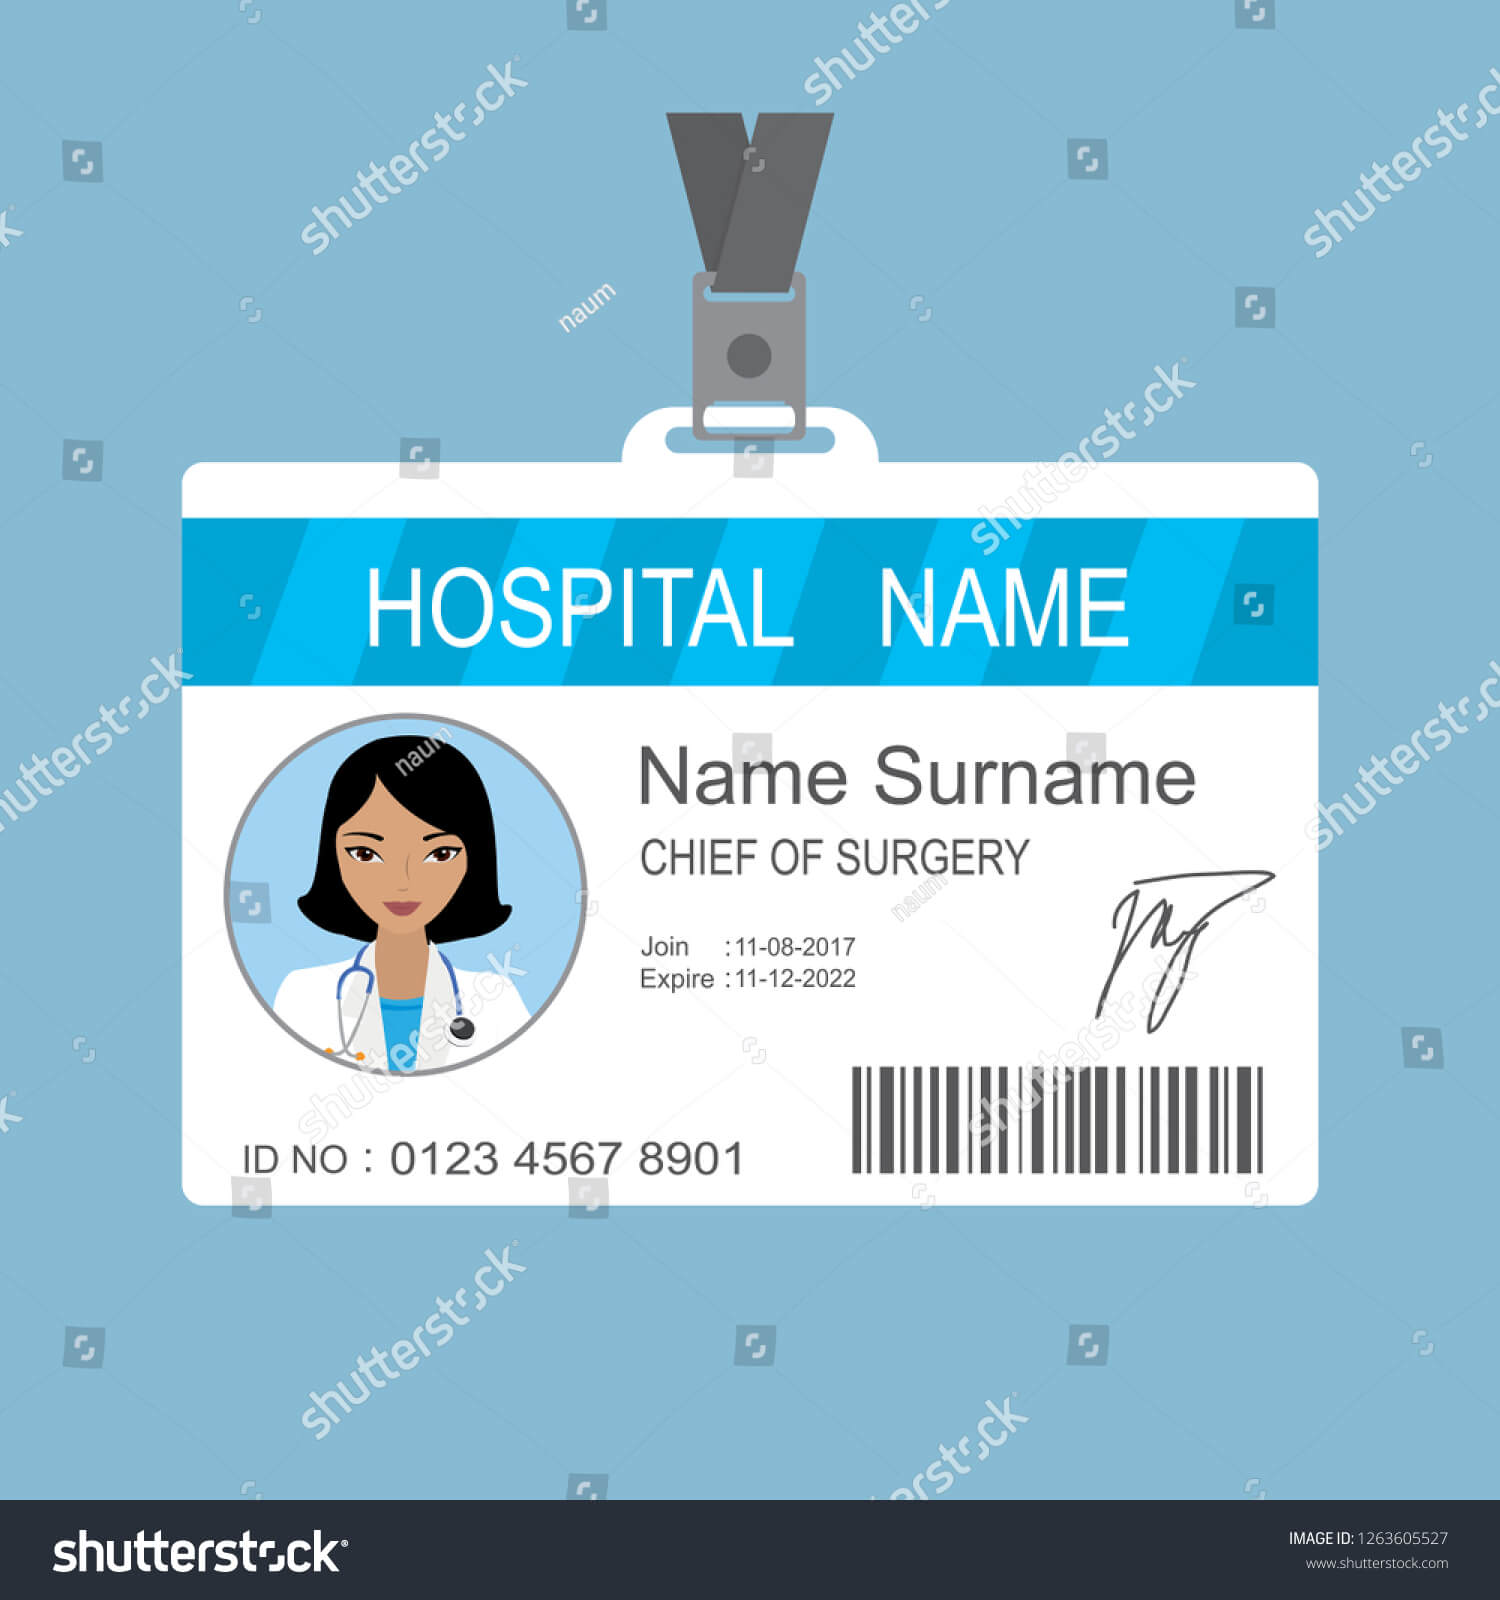 Female Asian Doctor Id Card Templatemedical Stock Image Inside Doctor Id Card Template